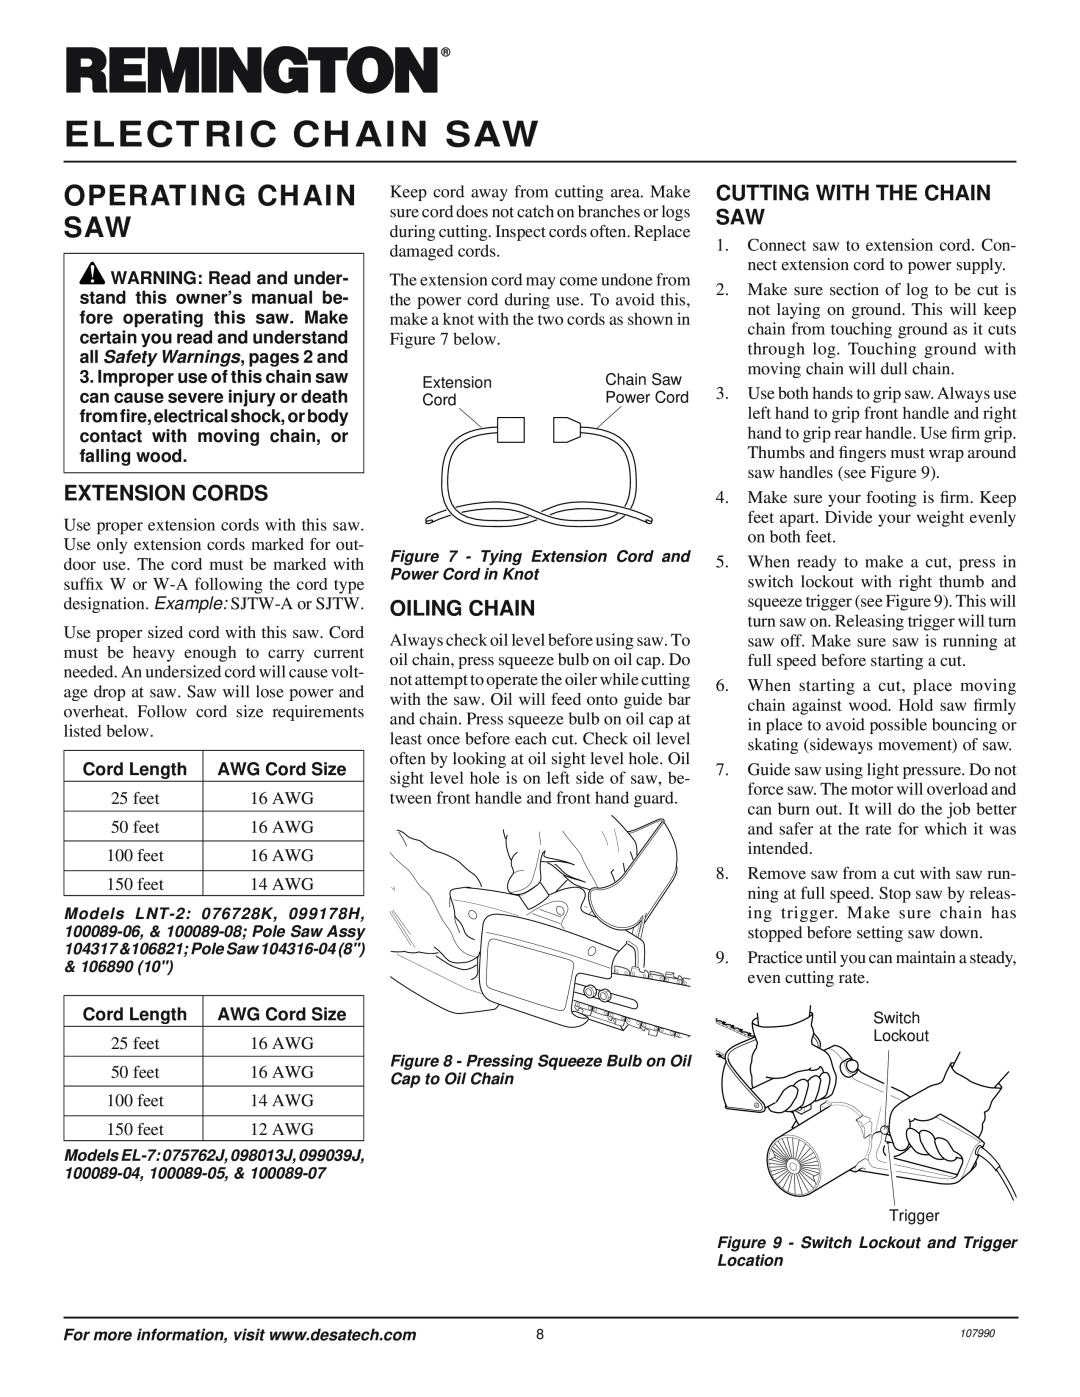 Desa LNT-2: 076728K Operating Chain Saw, Extension Cords, Oiling Chain, Cutting With The Chain Saw, Electric Chain Saw 